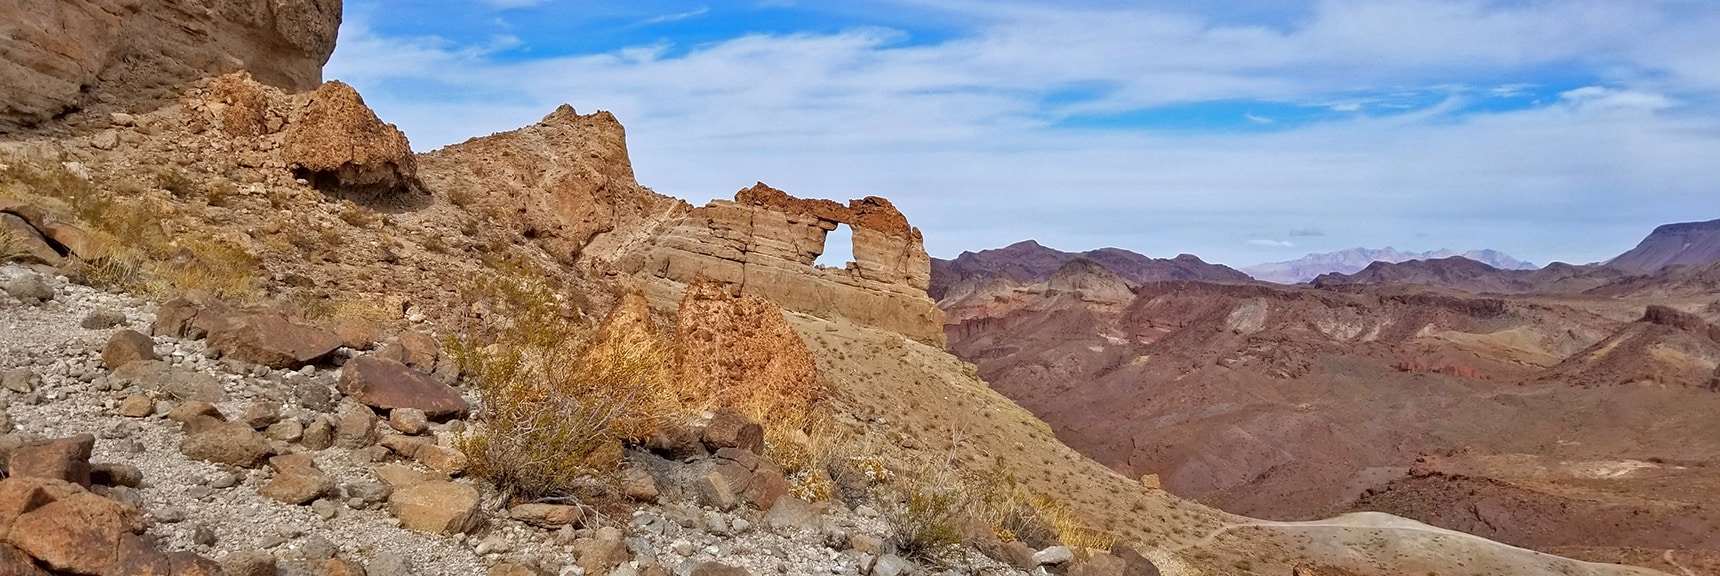 Liberty Bell Arch. Muddy Mountains in Far Distance to Right. | Arizona Hot Spring | Liberty Bell Arch | Lake Mead National Recreation Area, Arizona